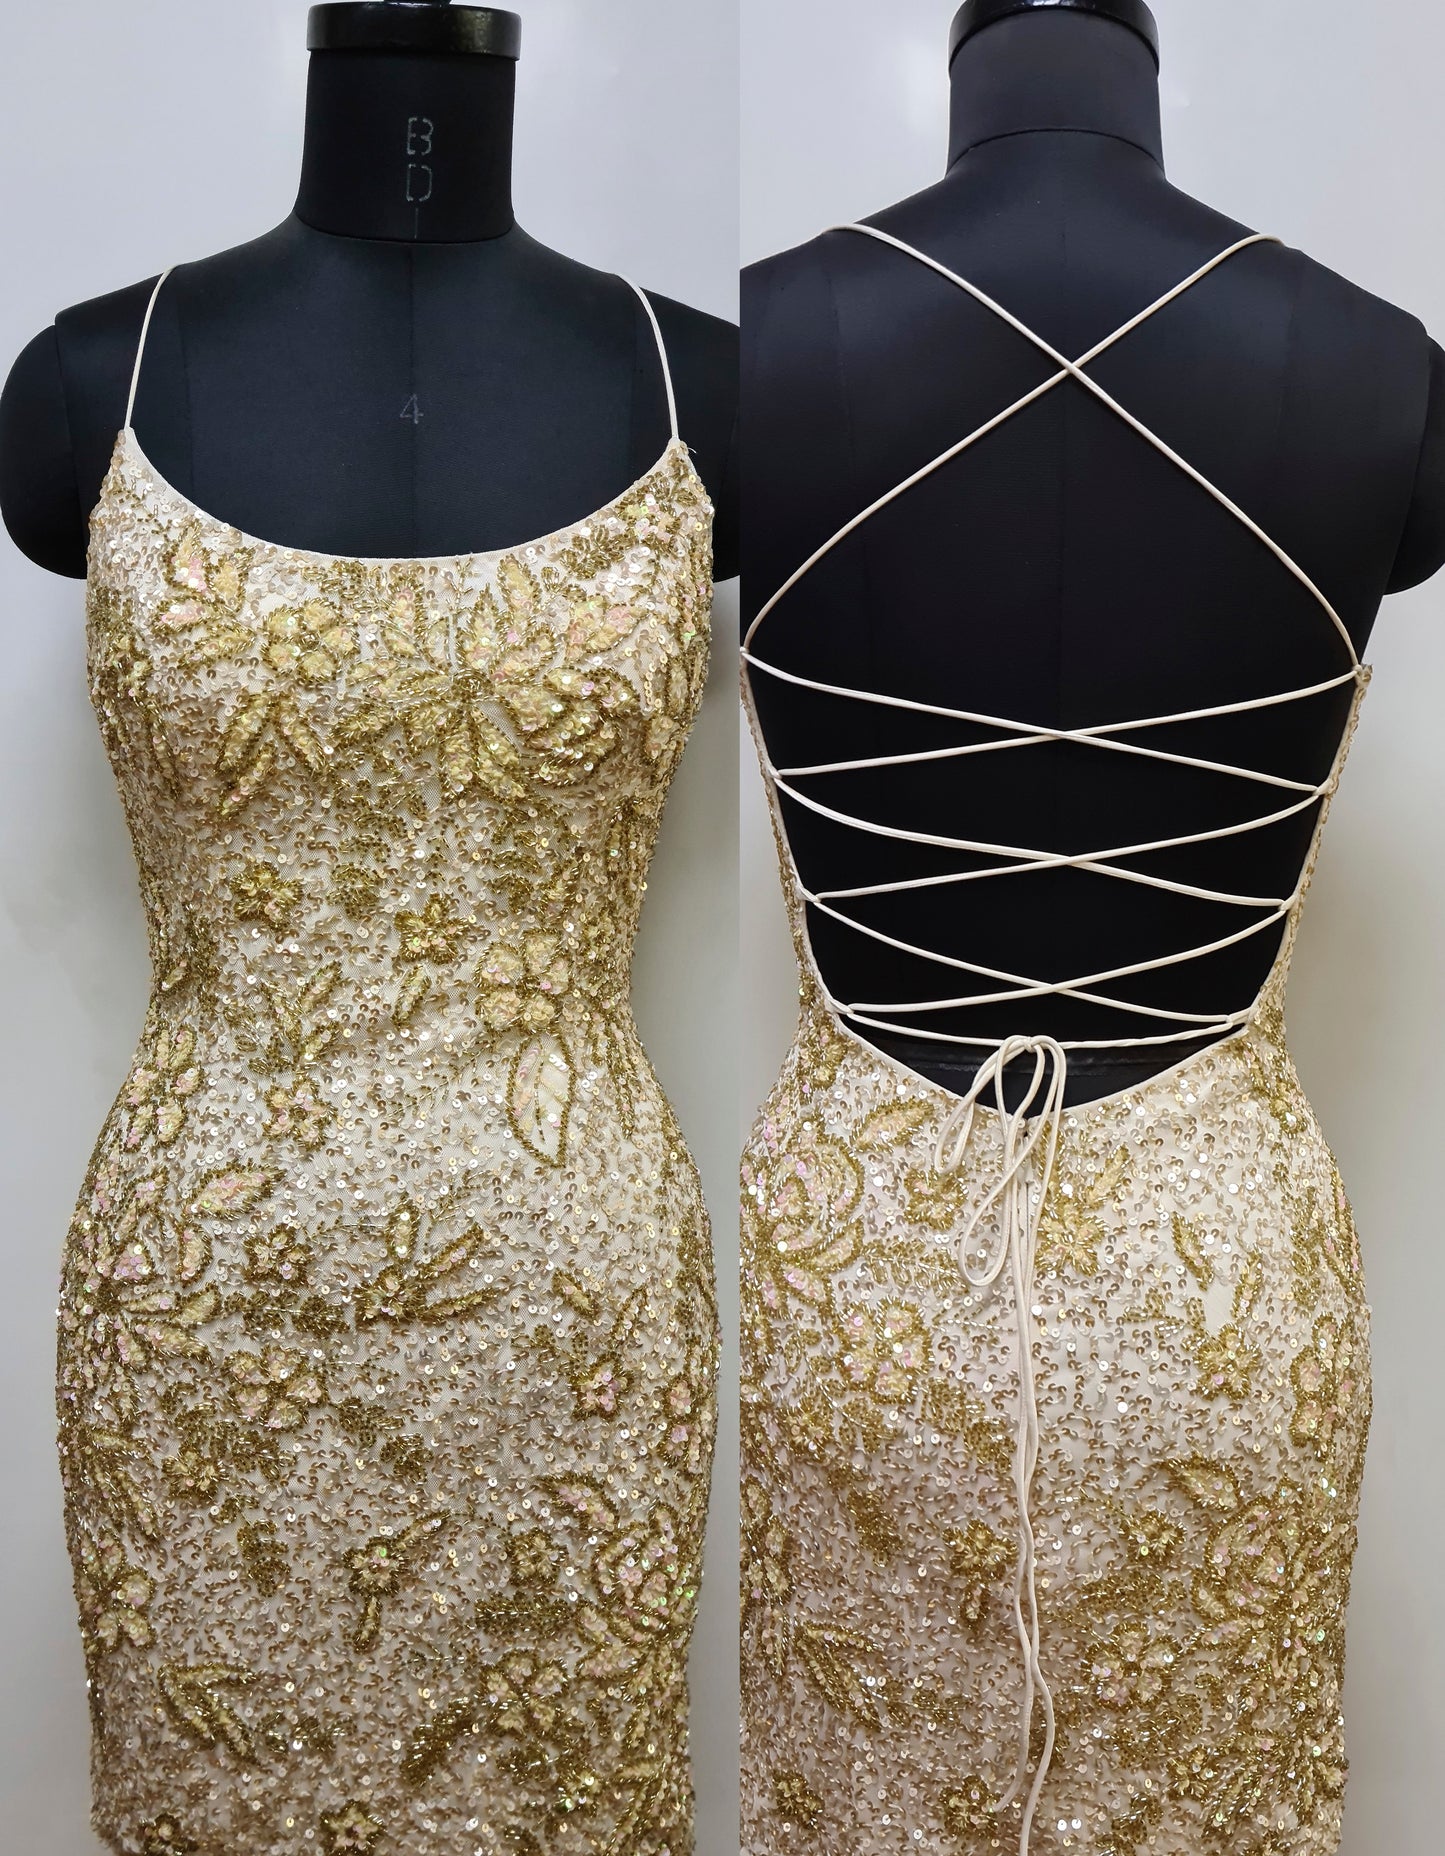 Primavera Couture 4040 Beaded Sequin Fully Embellished Open Tie Back Scoop Neck Homecoming Dress. Look stunning in the Primavera Couture 4040 Homecoming Dress. This chic piece is made of beaded sequins and fully embellished with an open tie back and scoop neck. Perfect for any special occasion!   